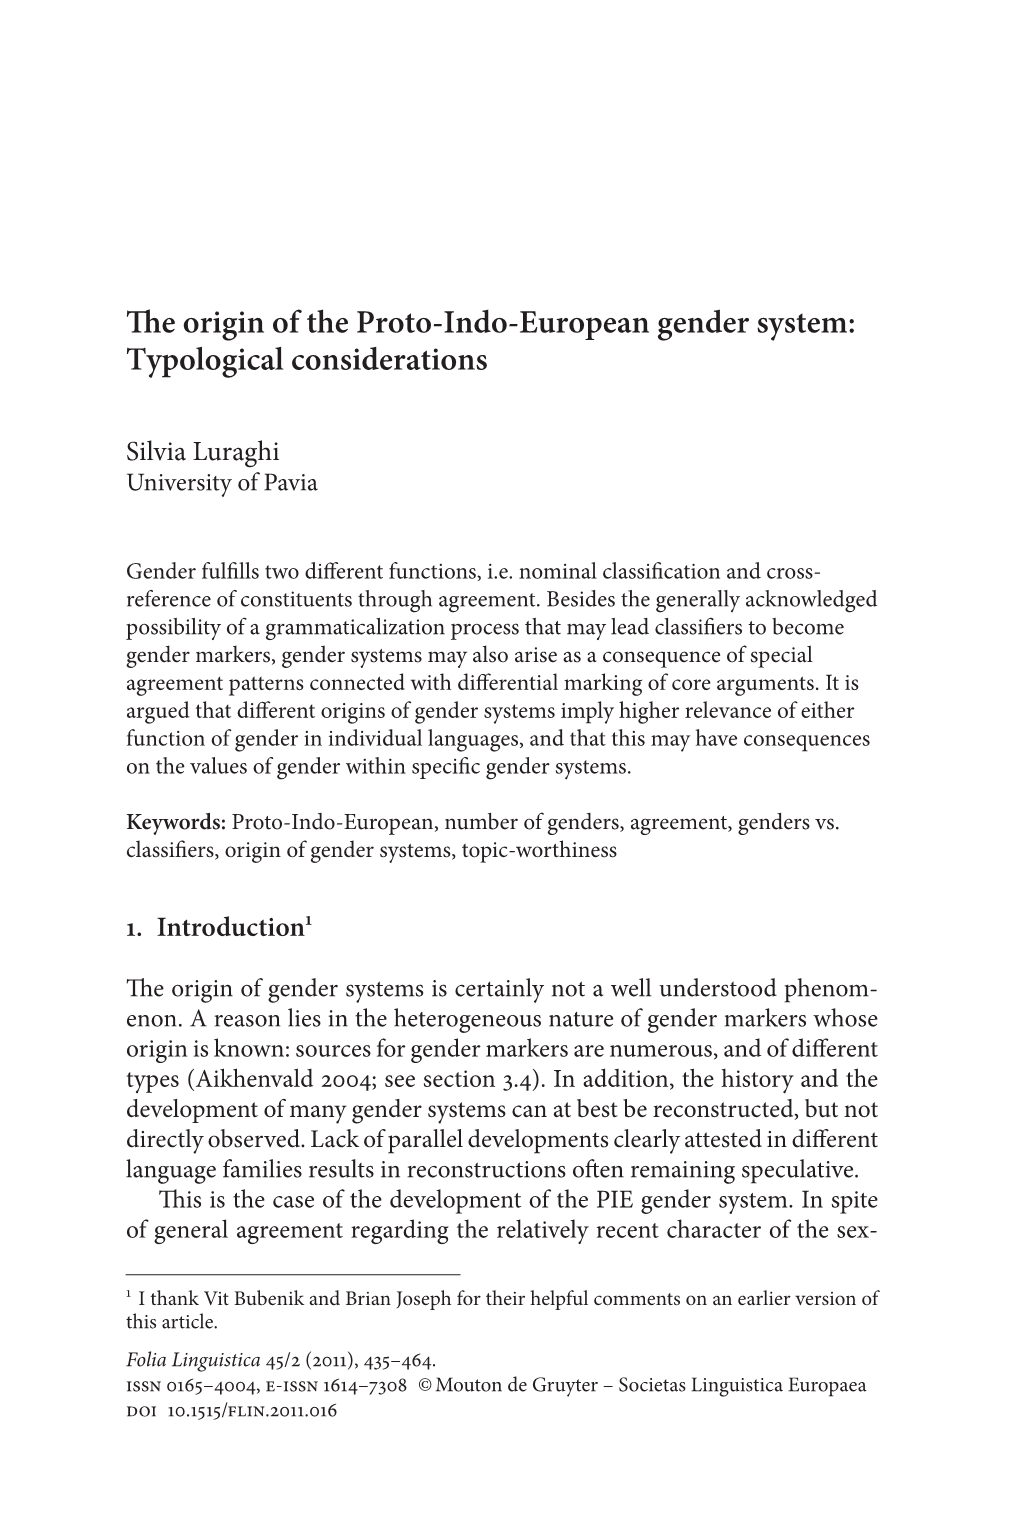 The Origin of the Proto-Indo-European Gender System: Typological Considerations